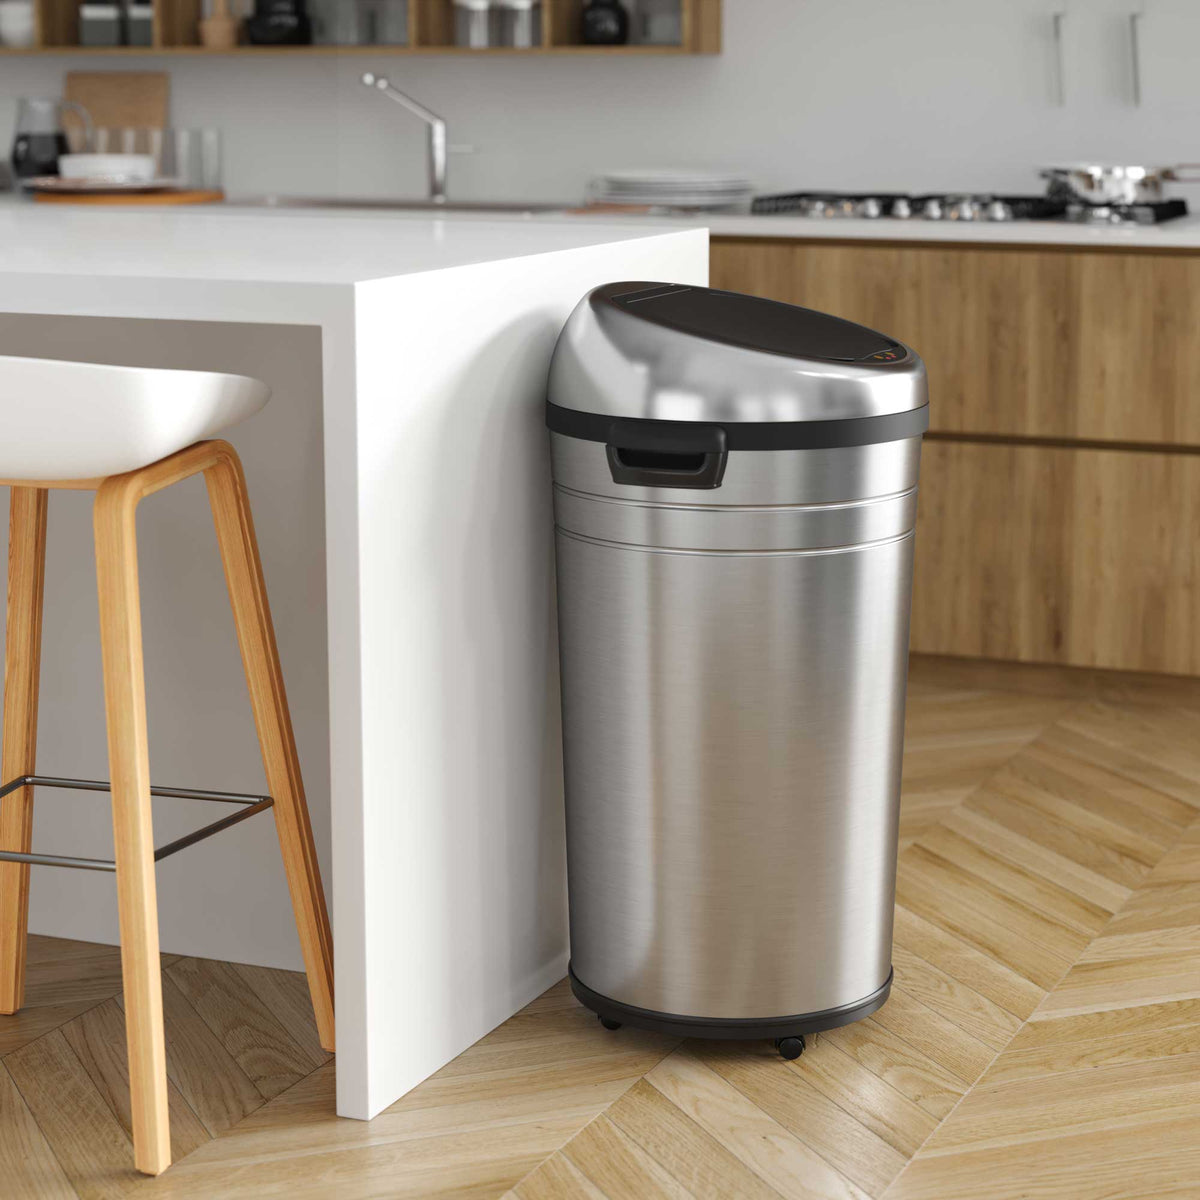 iTouchess 23 Gallon Sensor Trash Can with Wheels in kitchen